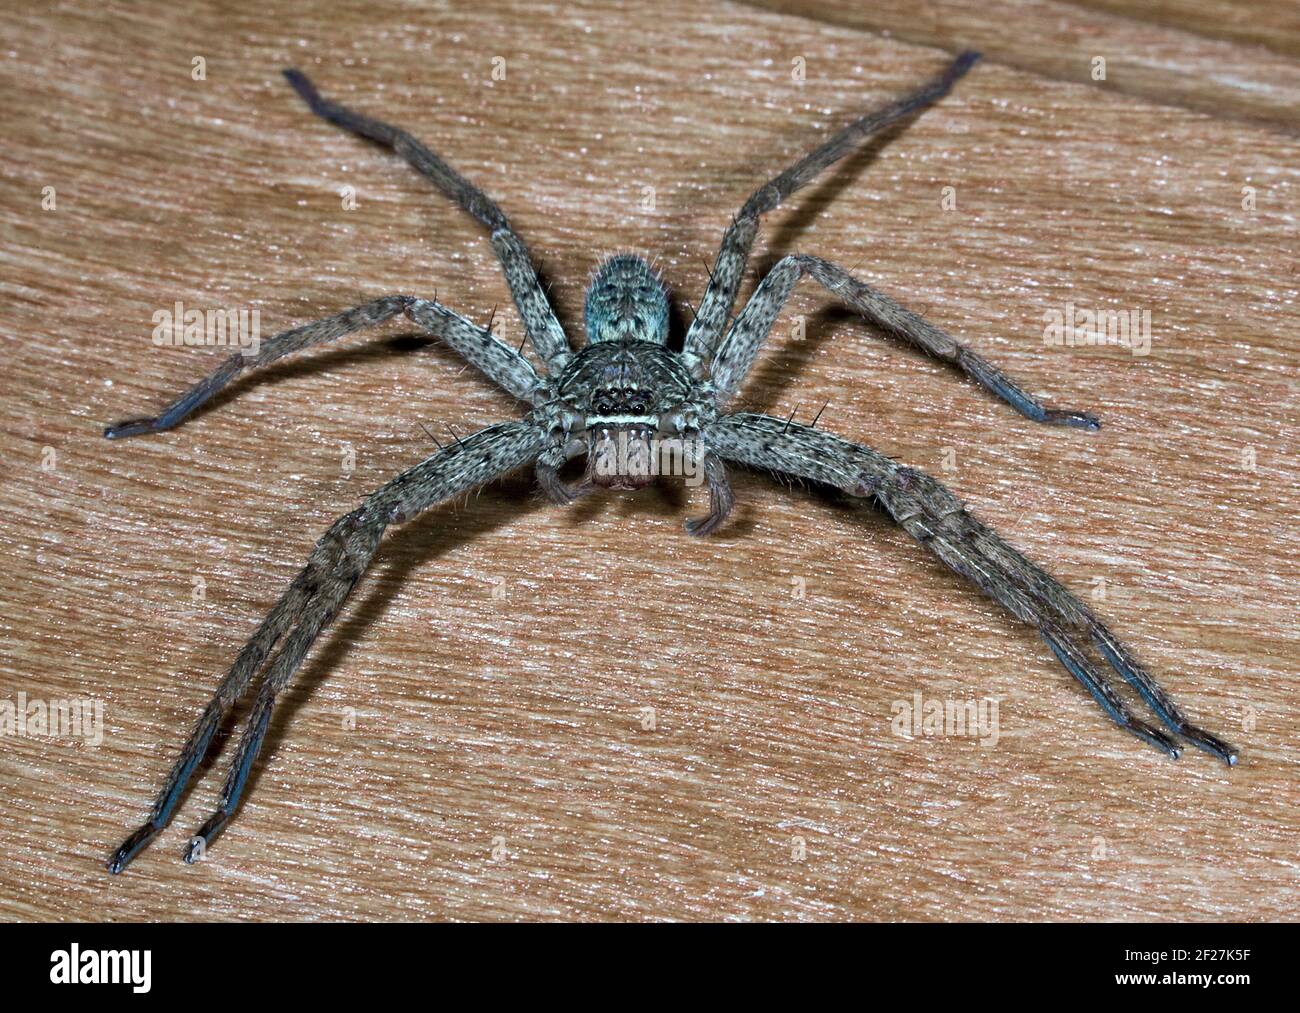 The big spider on a board Stock Photo